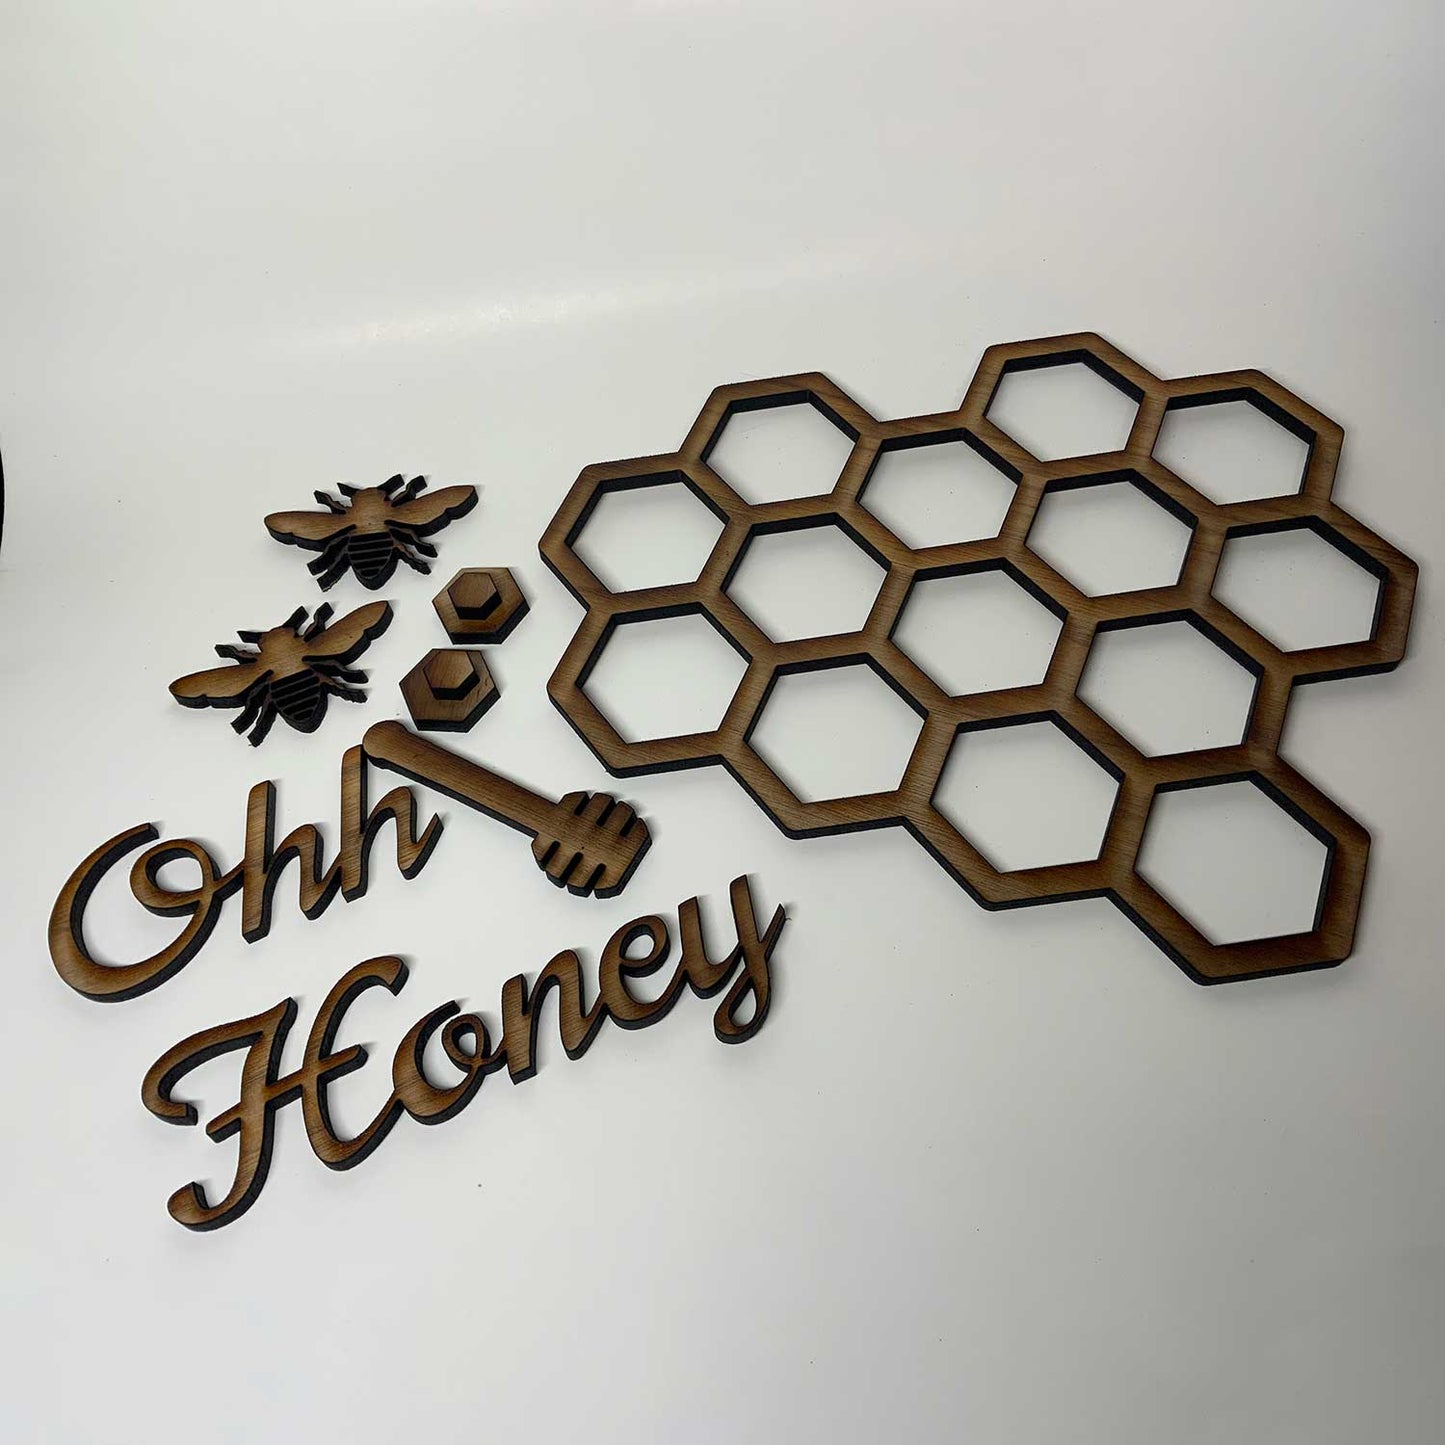 Honeycomb and Bee - Wooden Laser Cut Wall Decoration - Multiple